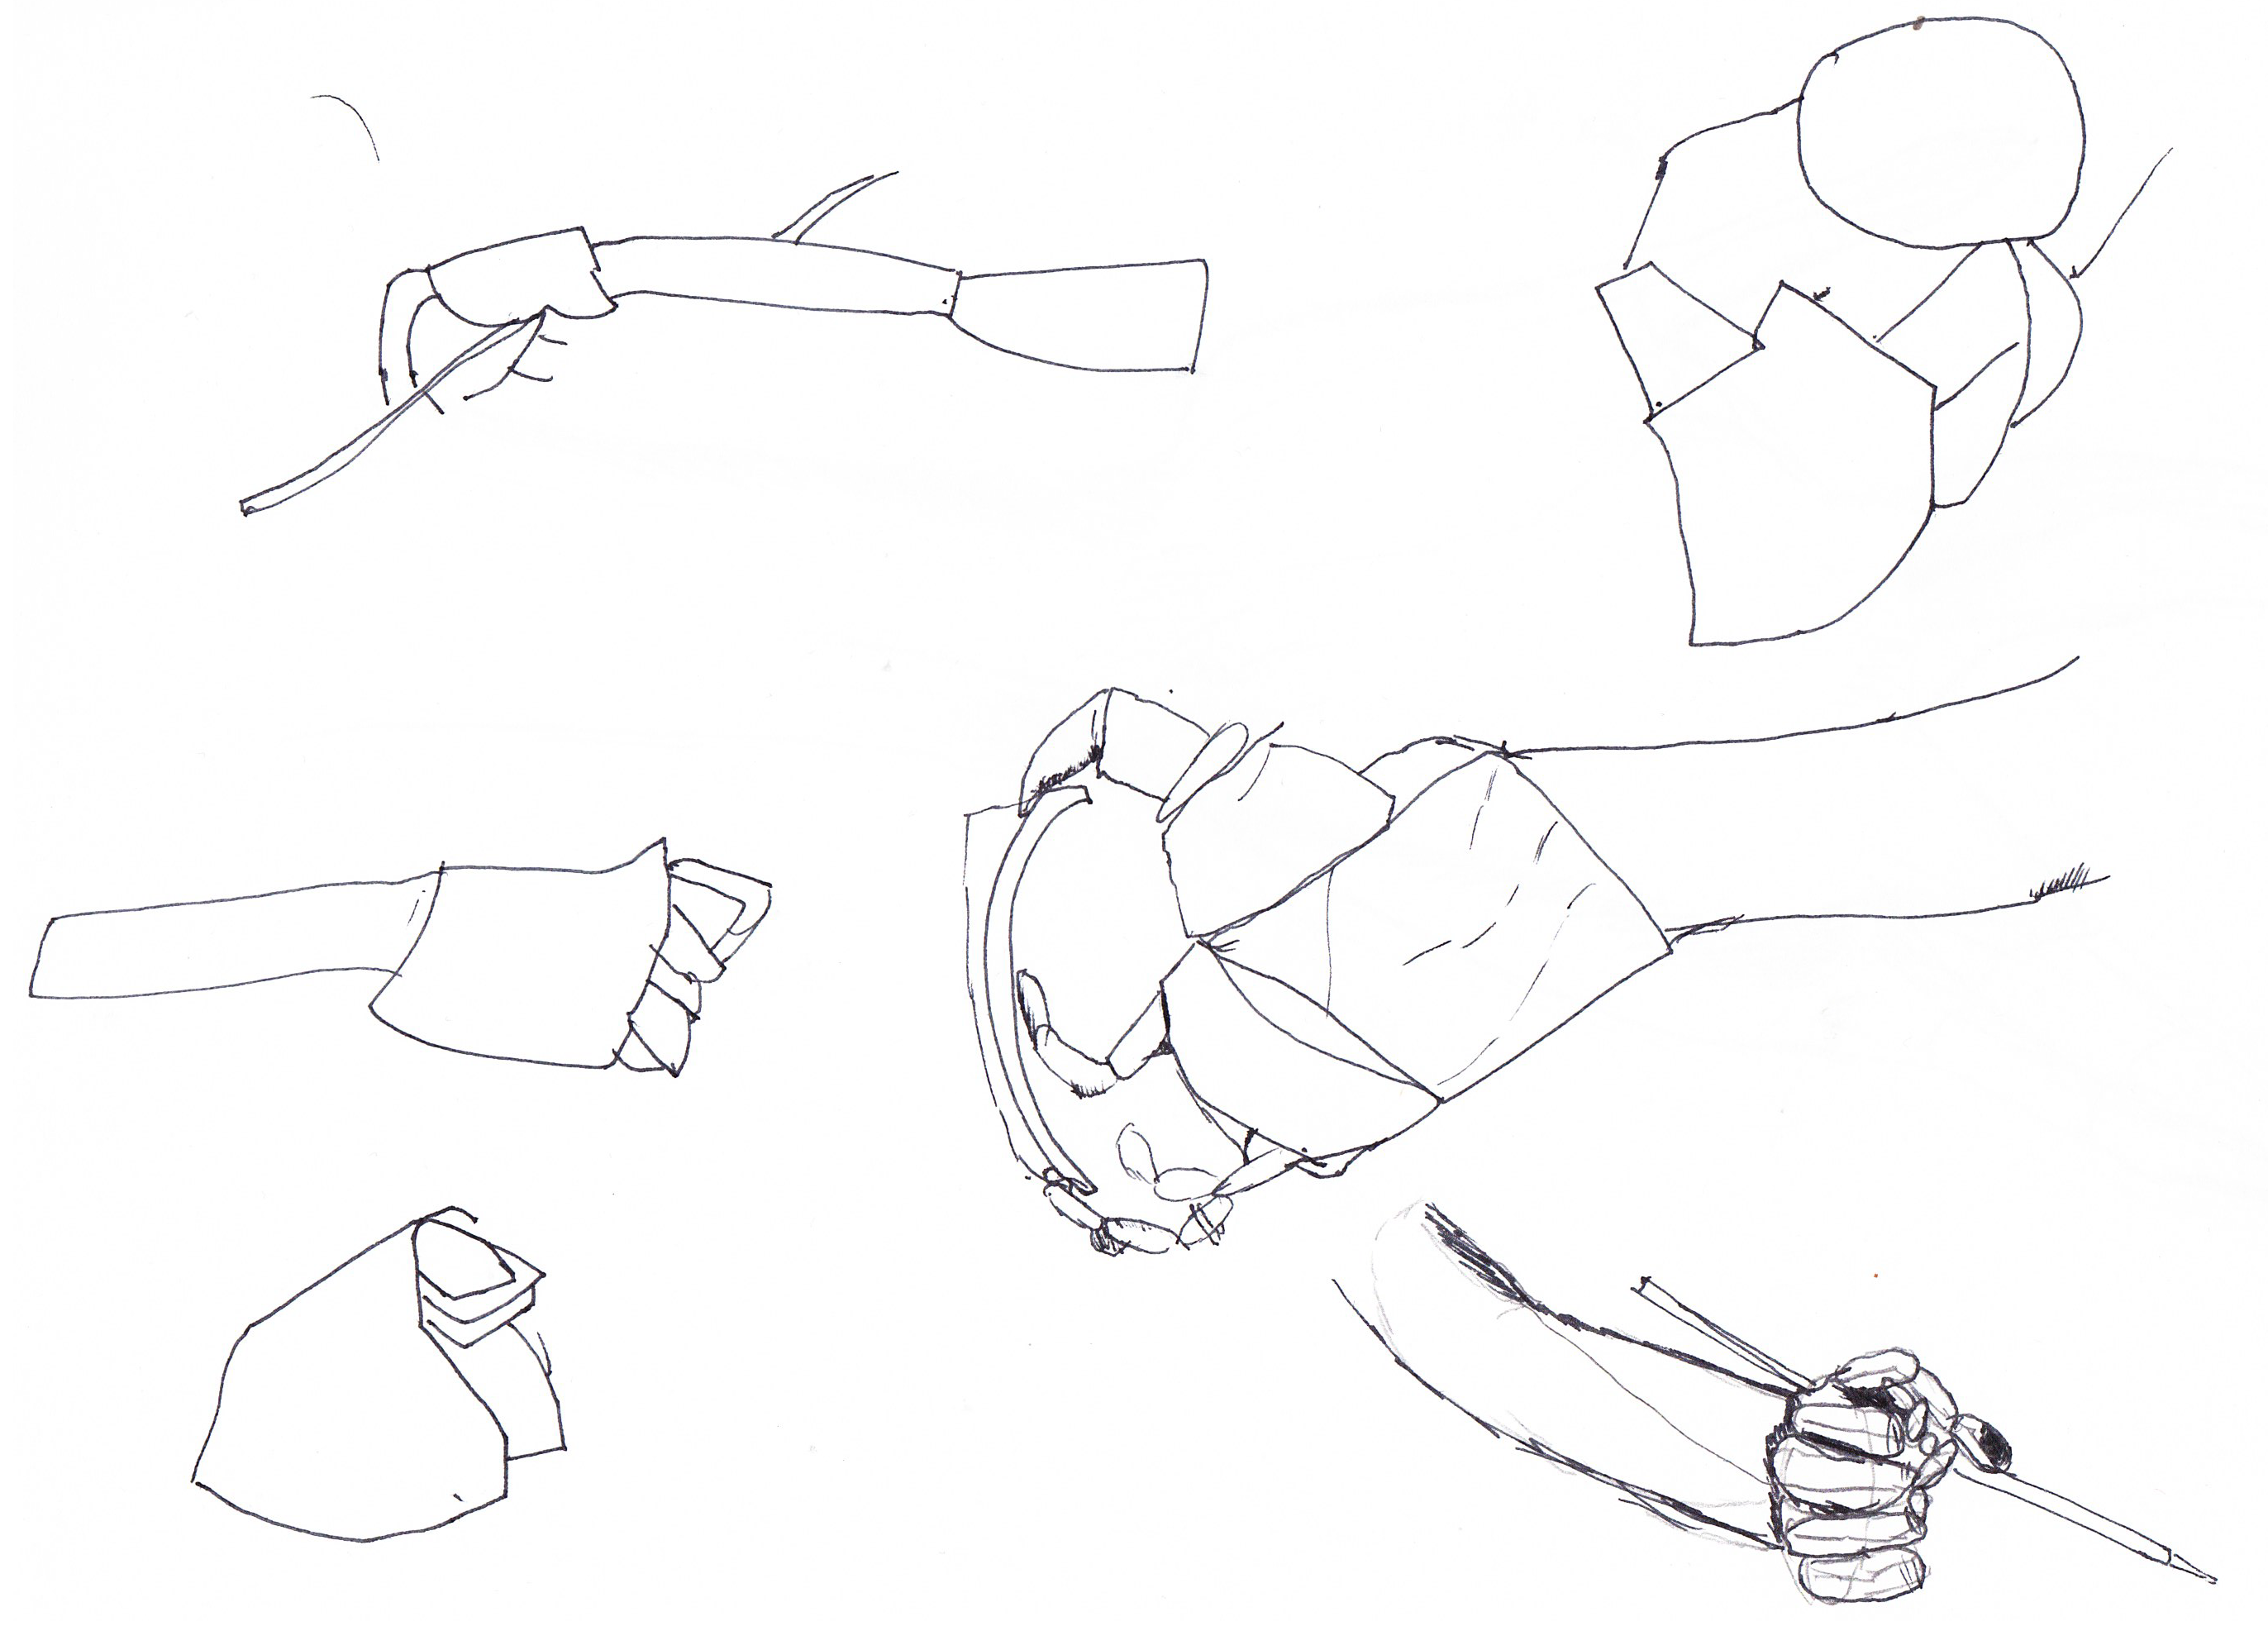 1 and 5 Minute Hands - Day 313 - Learning to Draw